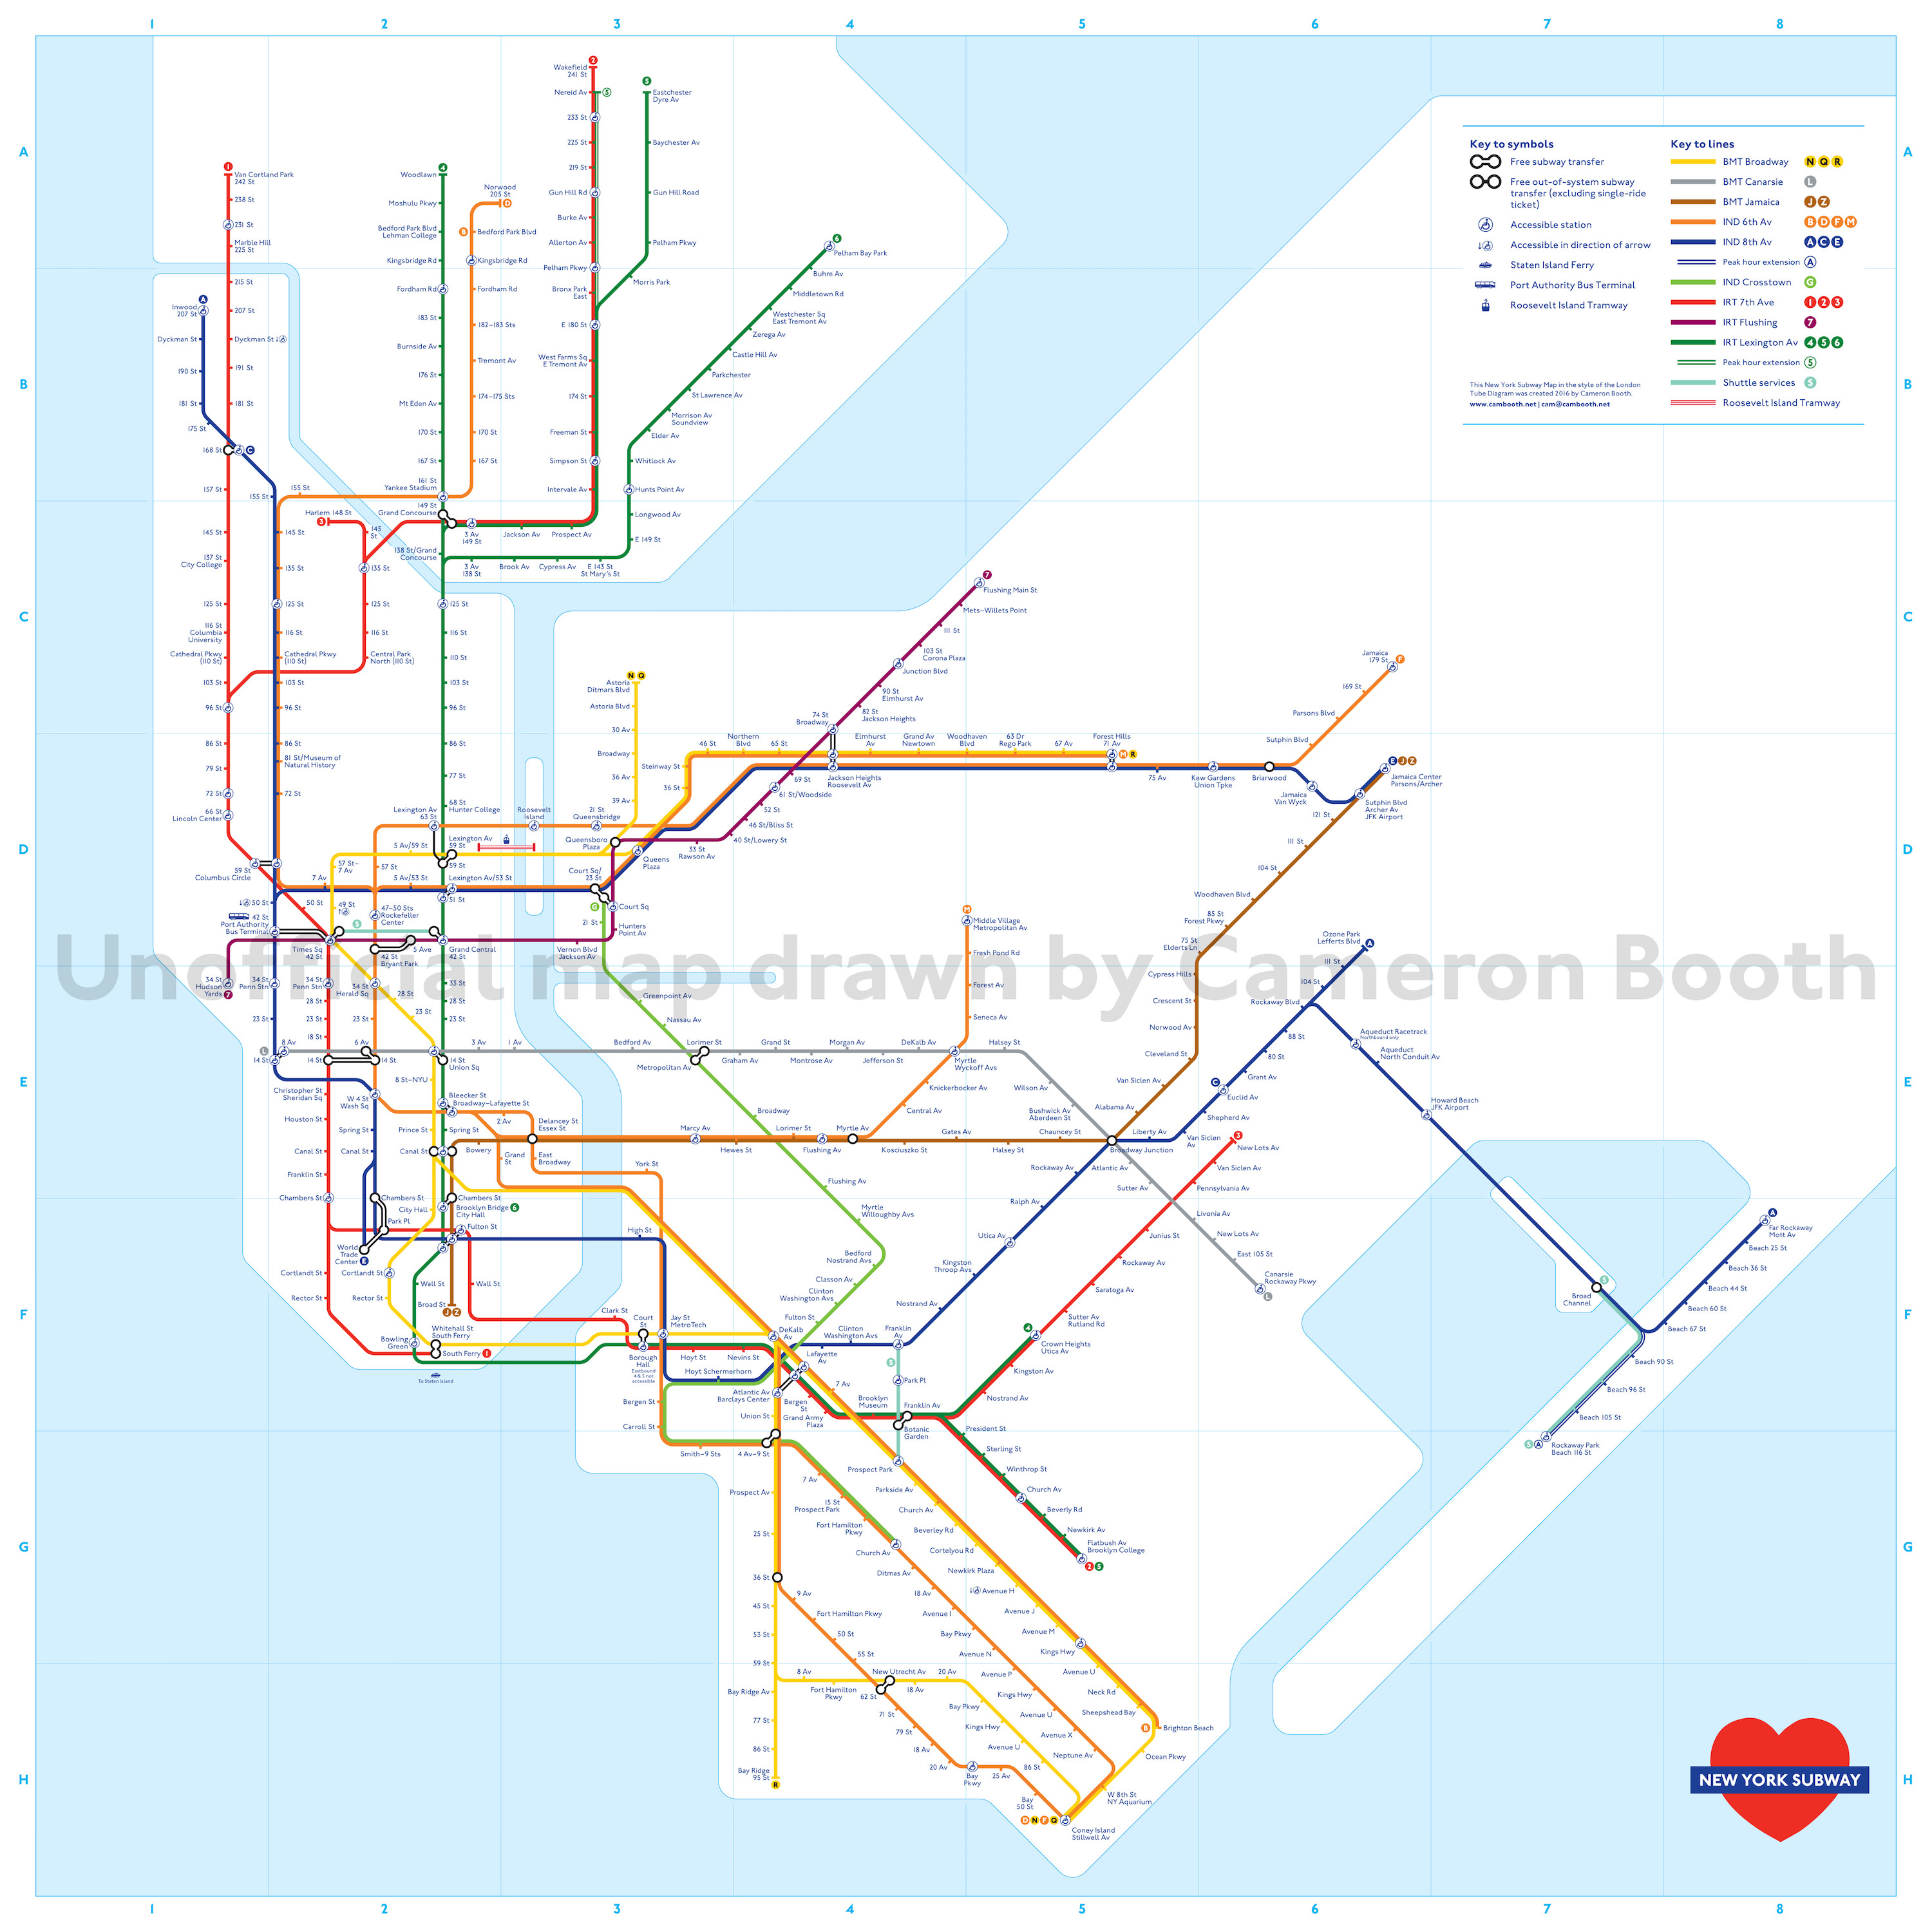 Map Mashup: The NYC Subway System Gets Re-Stylized as The London Tube